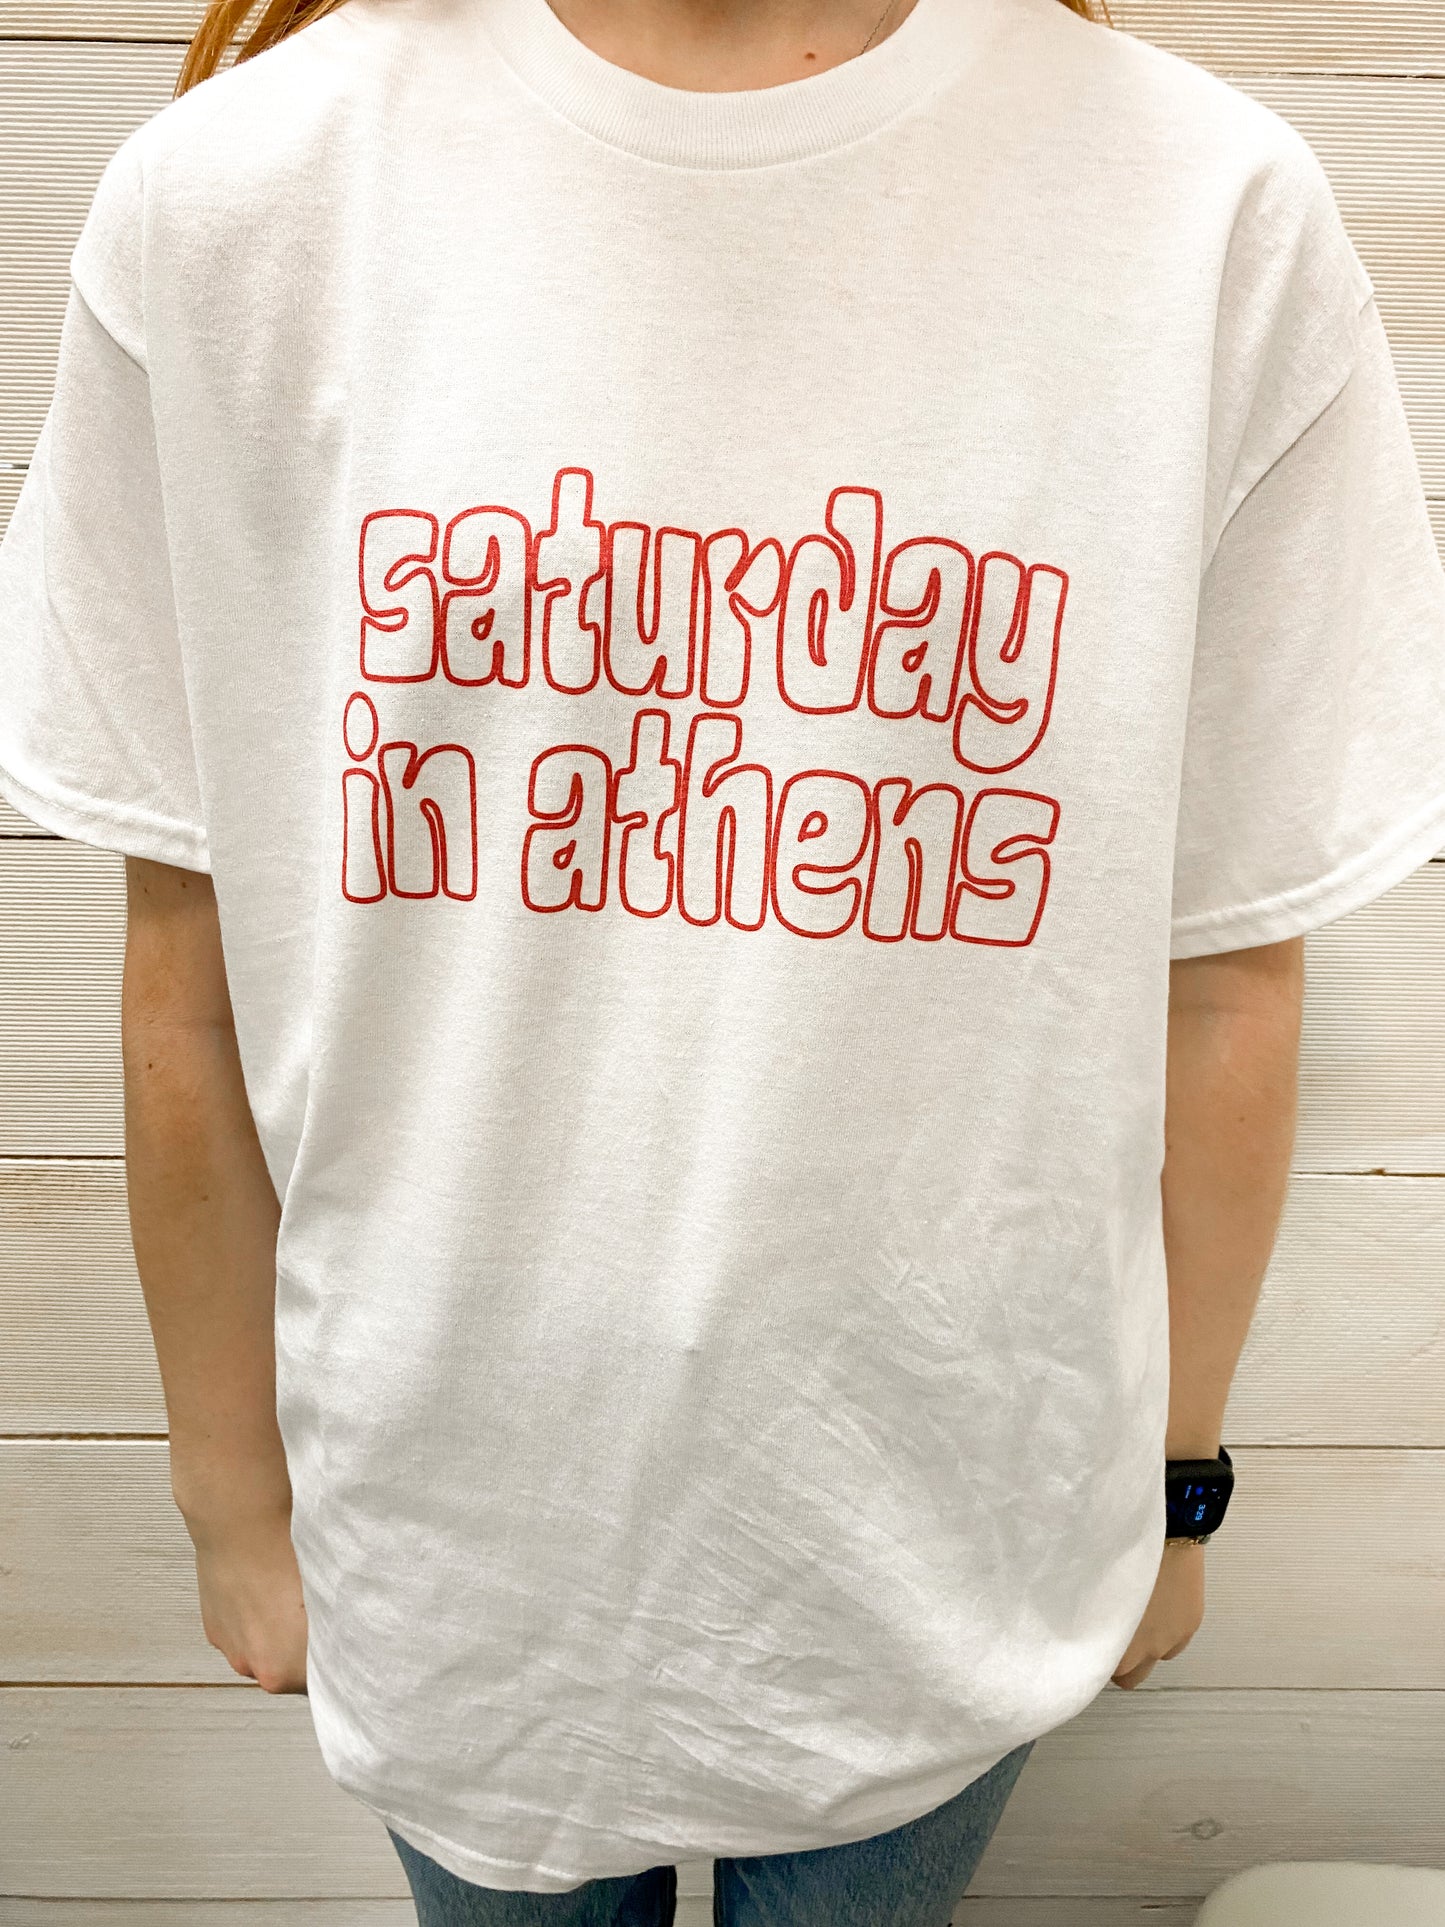 Saturday In Athens Graphic Tee